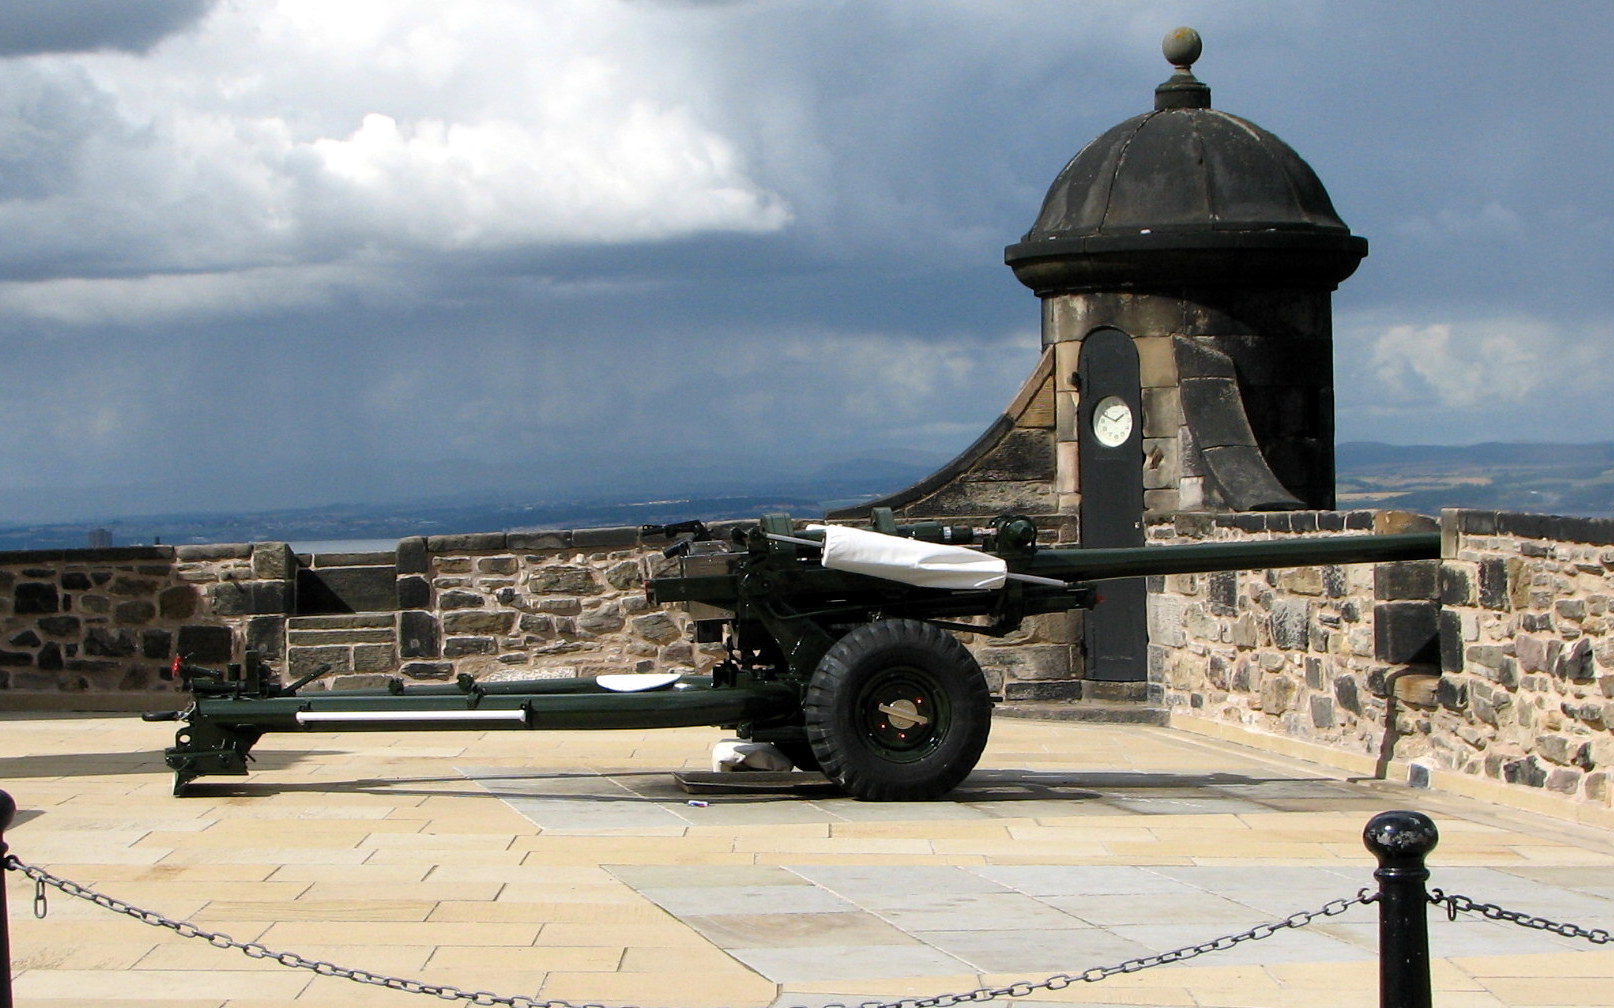 The One O'Clock gun fires everyday at exactly 1:00pm. (2005)